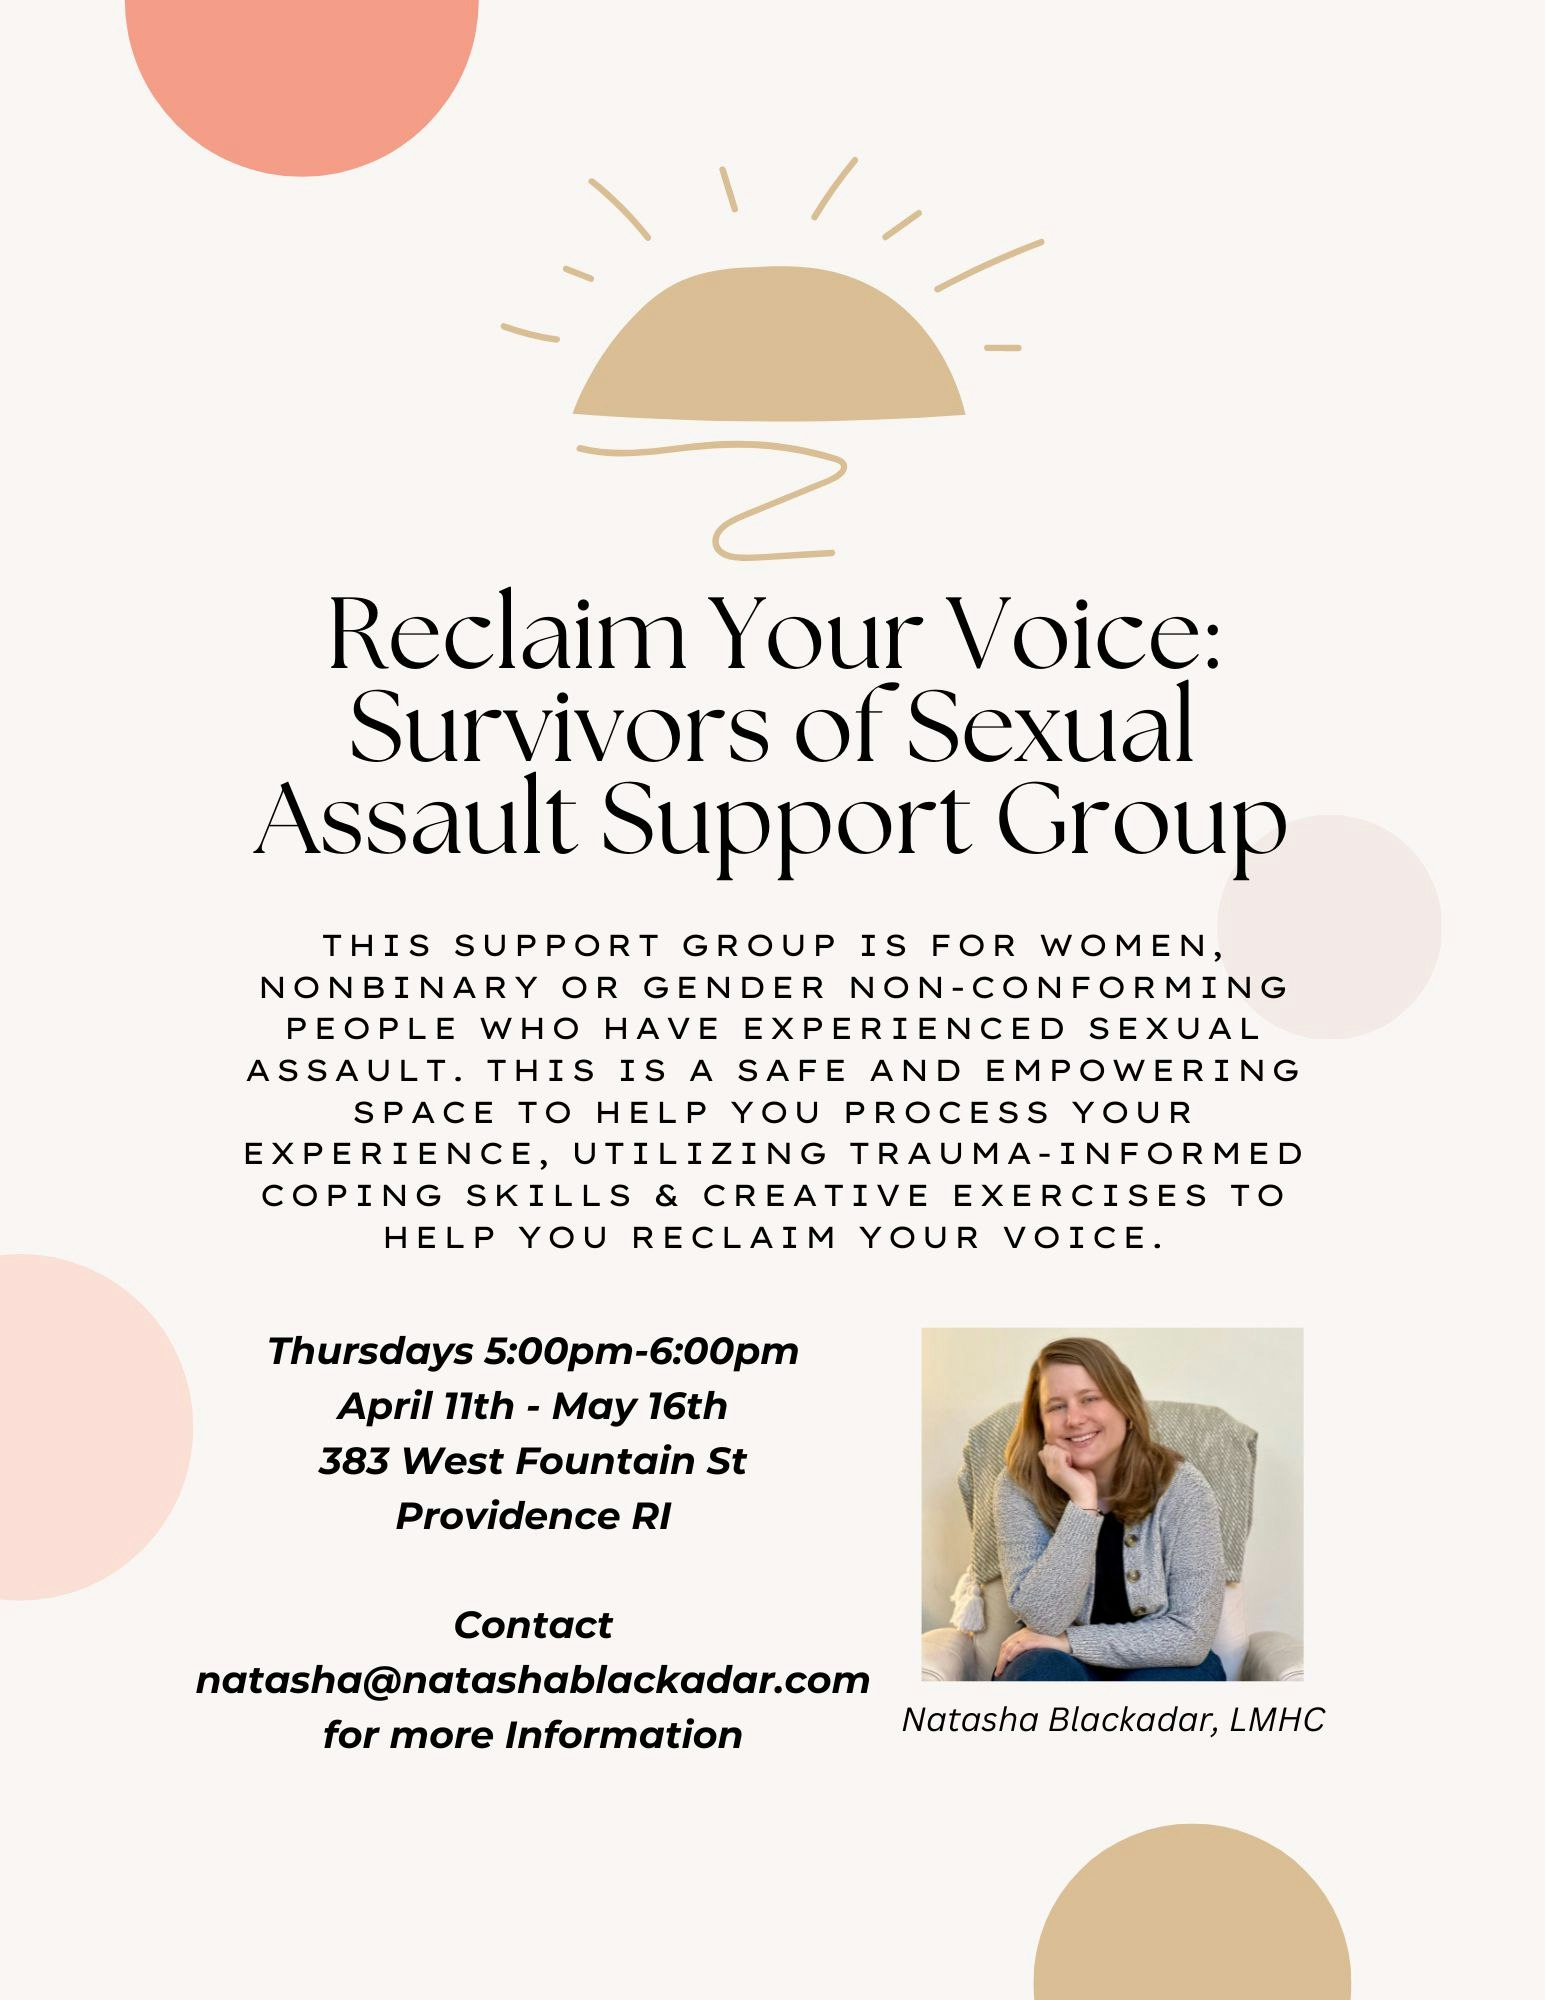 Reclaiming Your Voice: Survivors of Sexual Assault Support Group